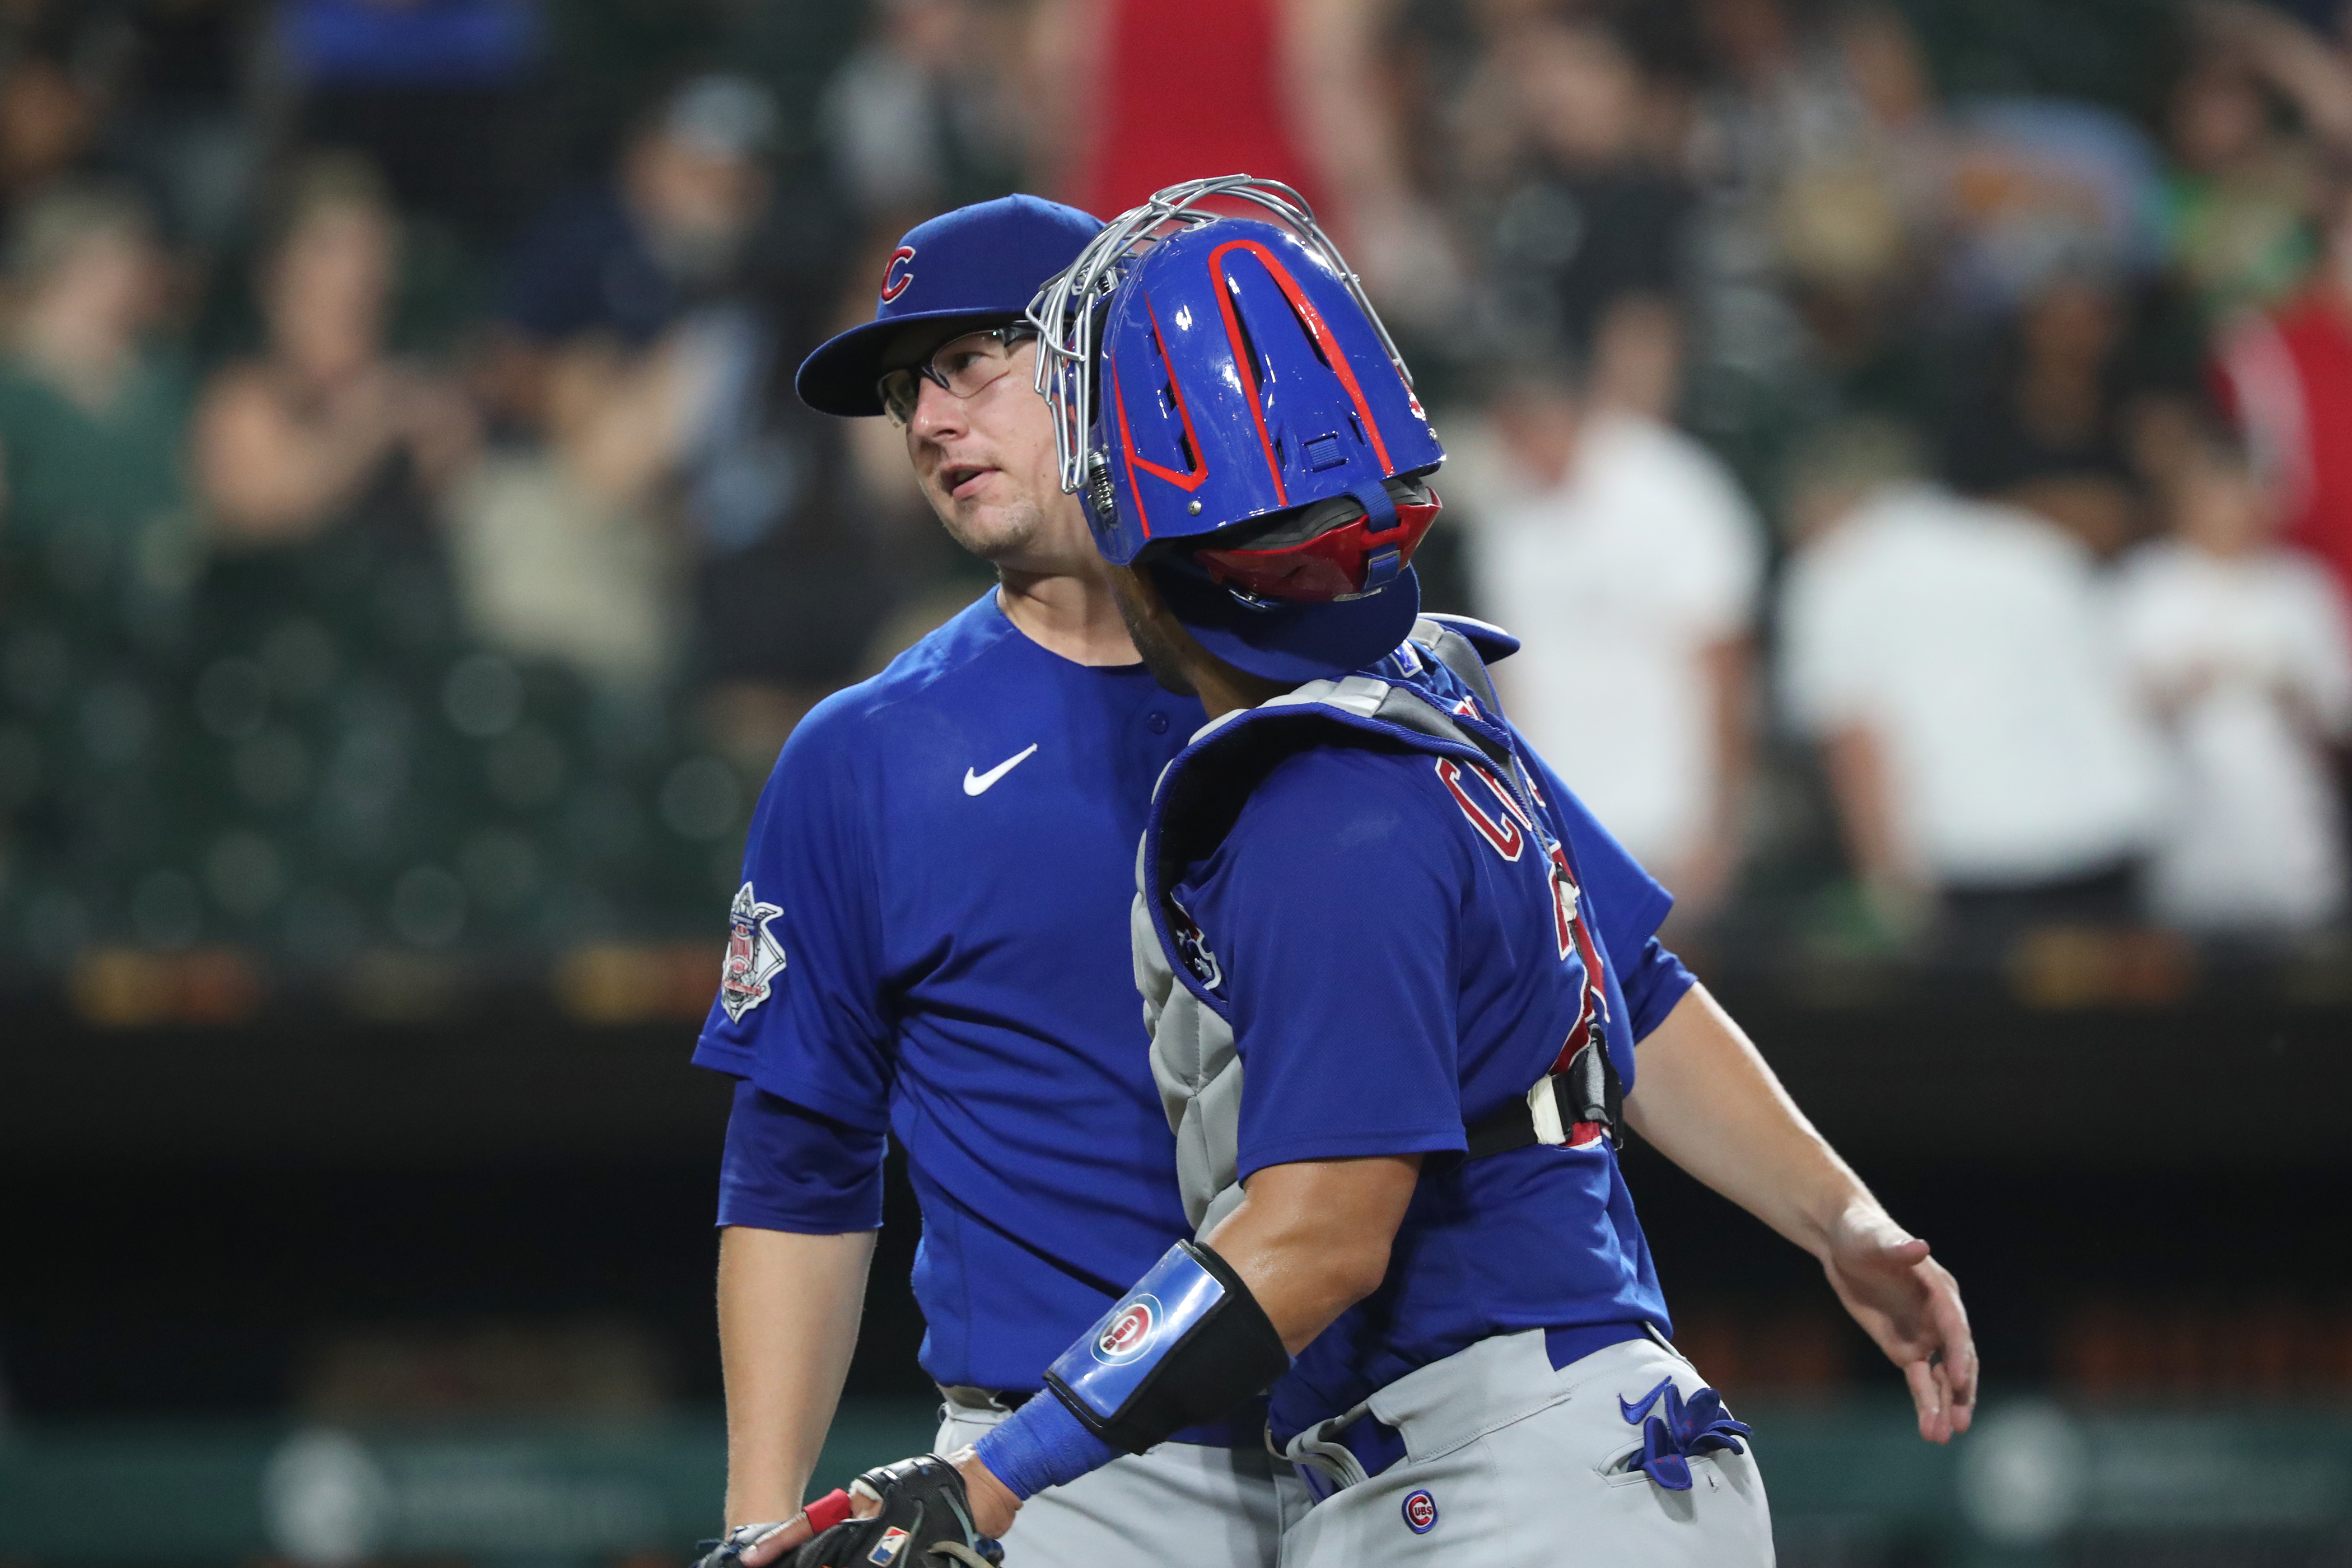 Patrick Wisdom: Eye-popping stats from Chicago Cubs rookie's streak